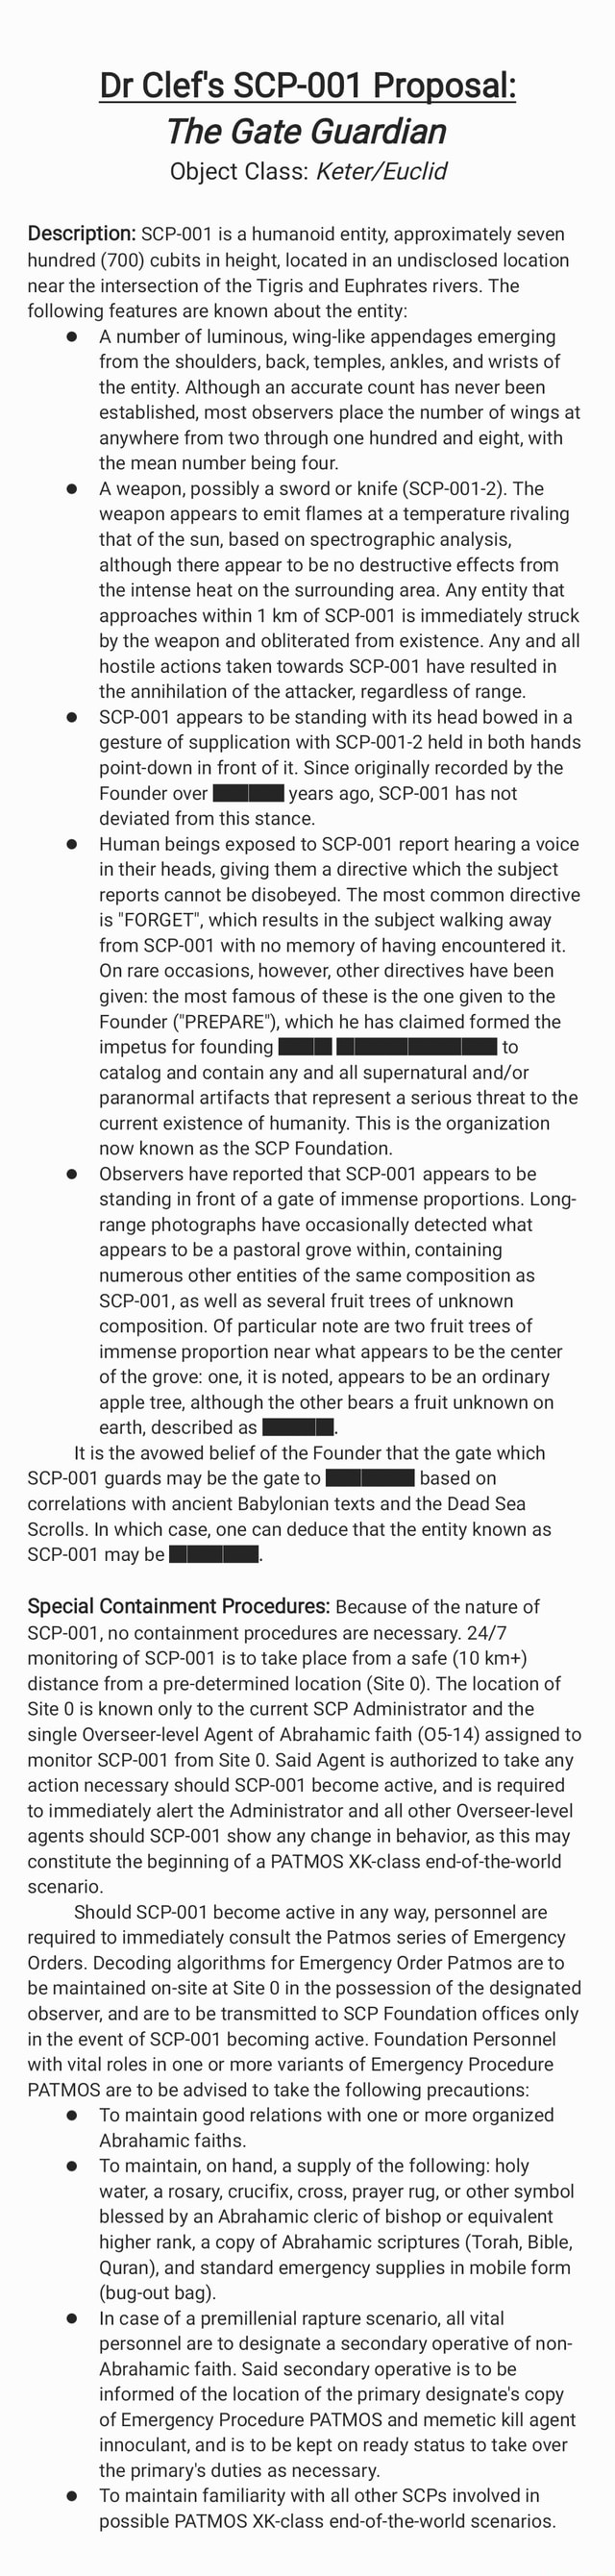 SCP-001 (Dr.Clef's Proposal), Fiction Taxonomy Wiki